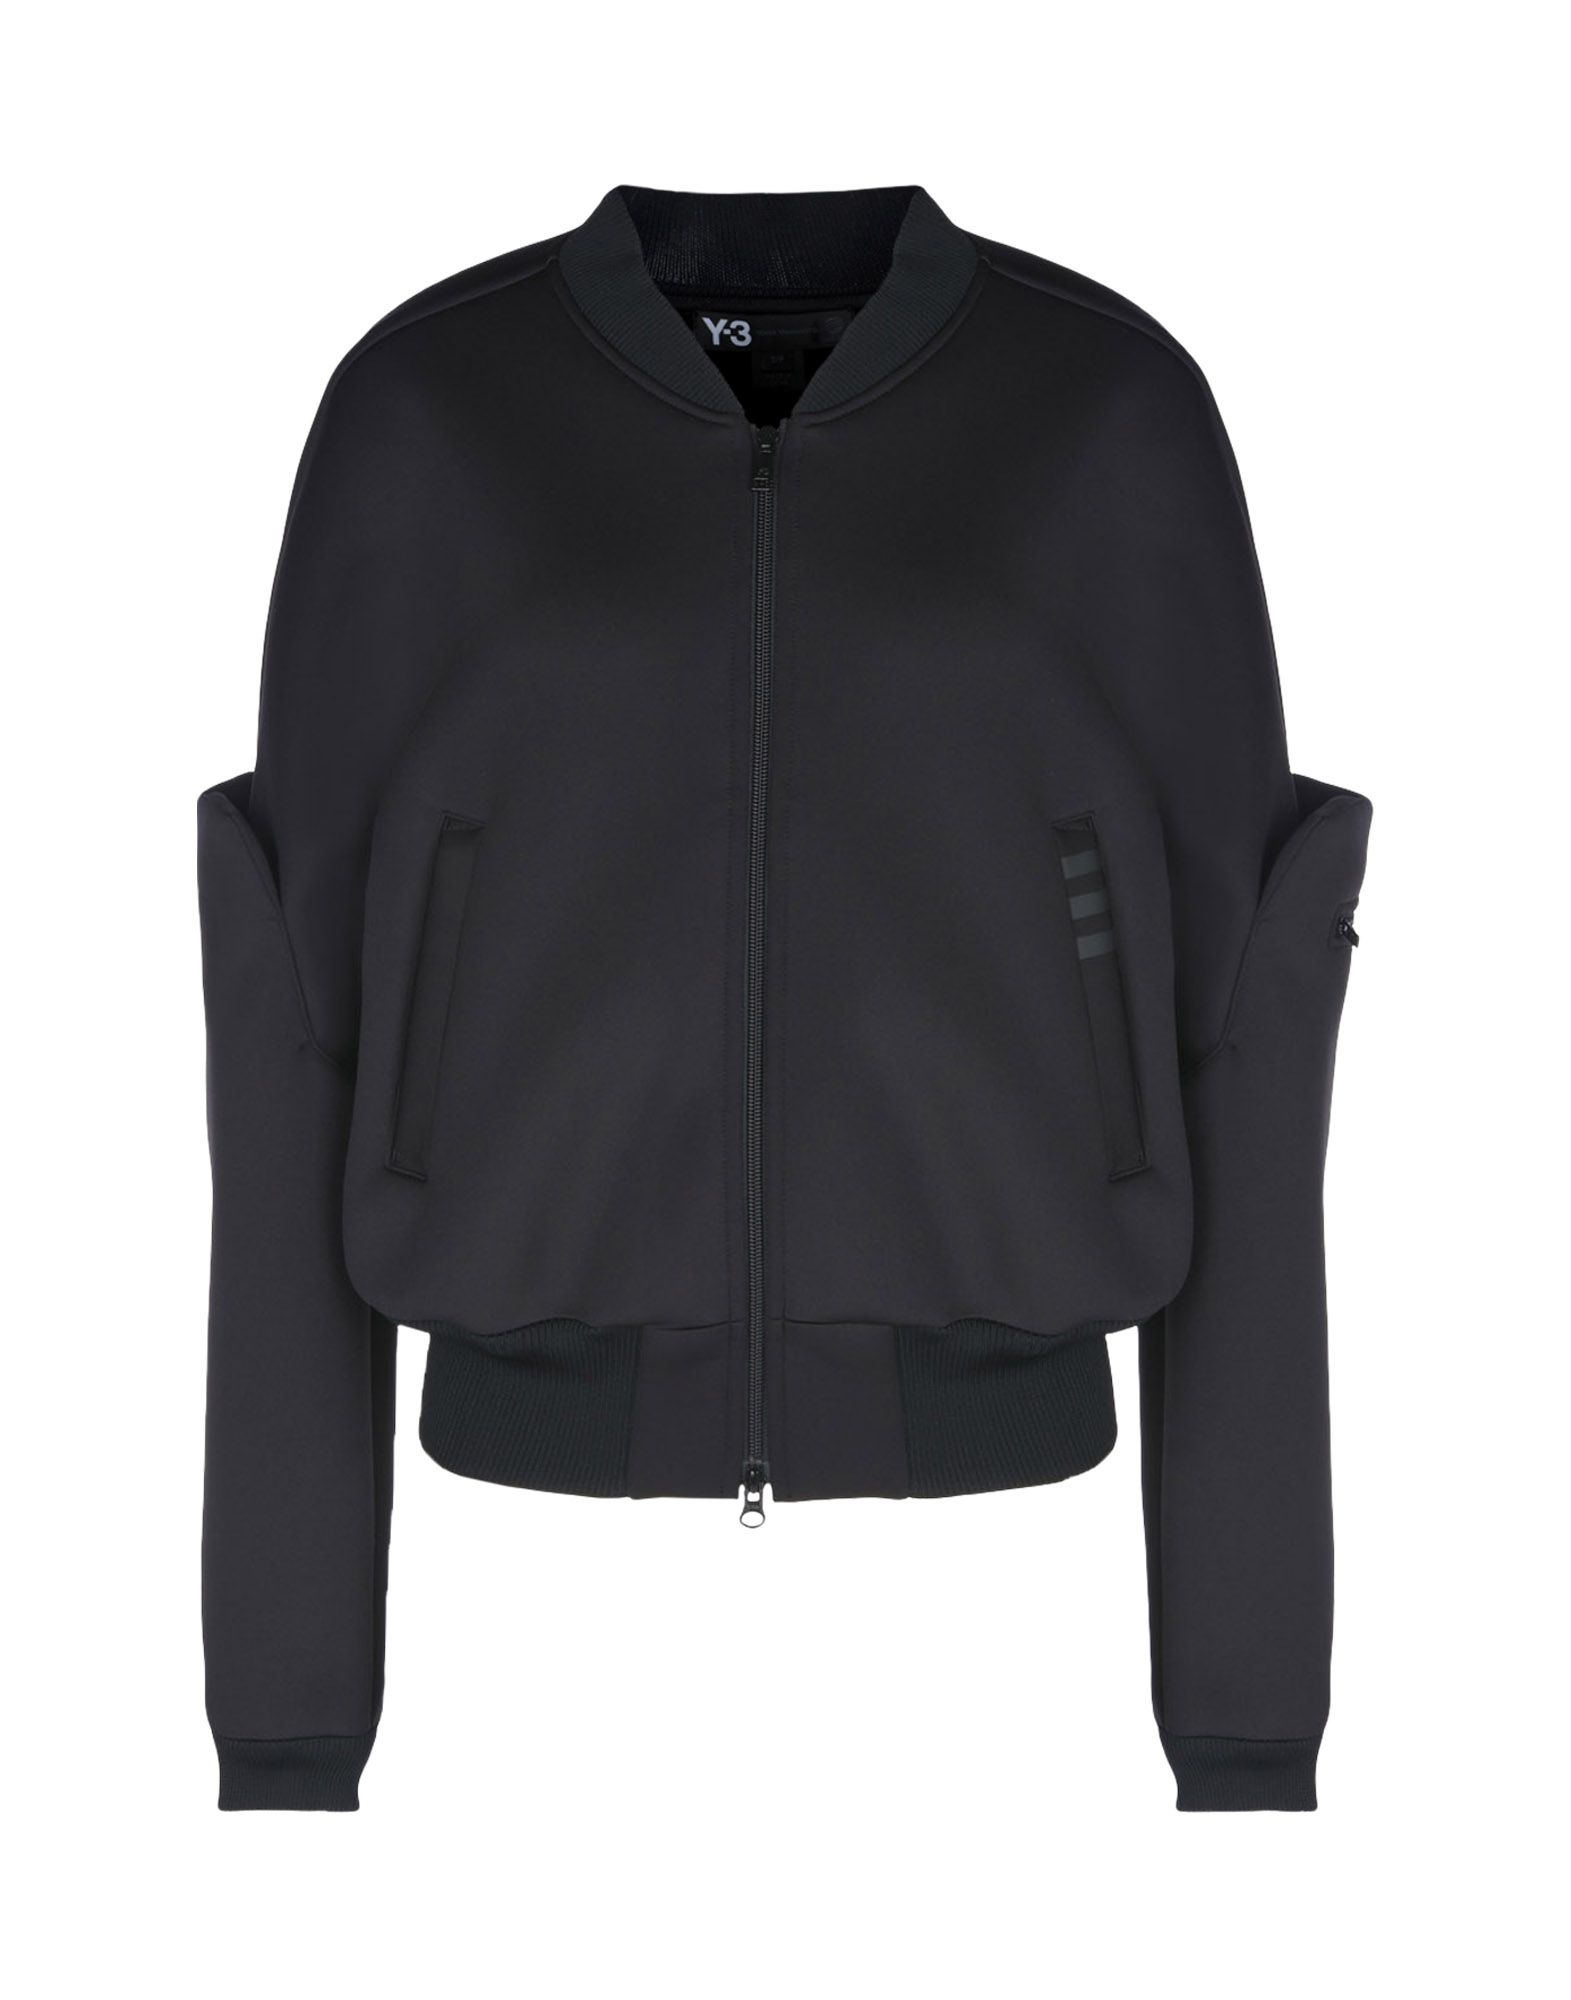 Y 3 SPACER LUX BOMBER for Women | Adidas Y-3 Official Store